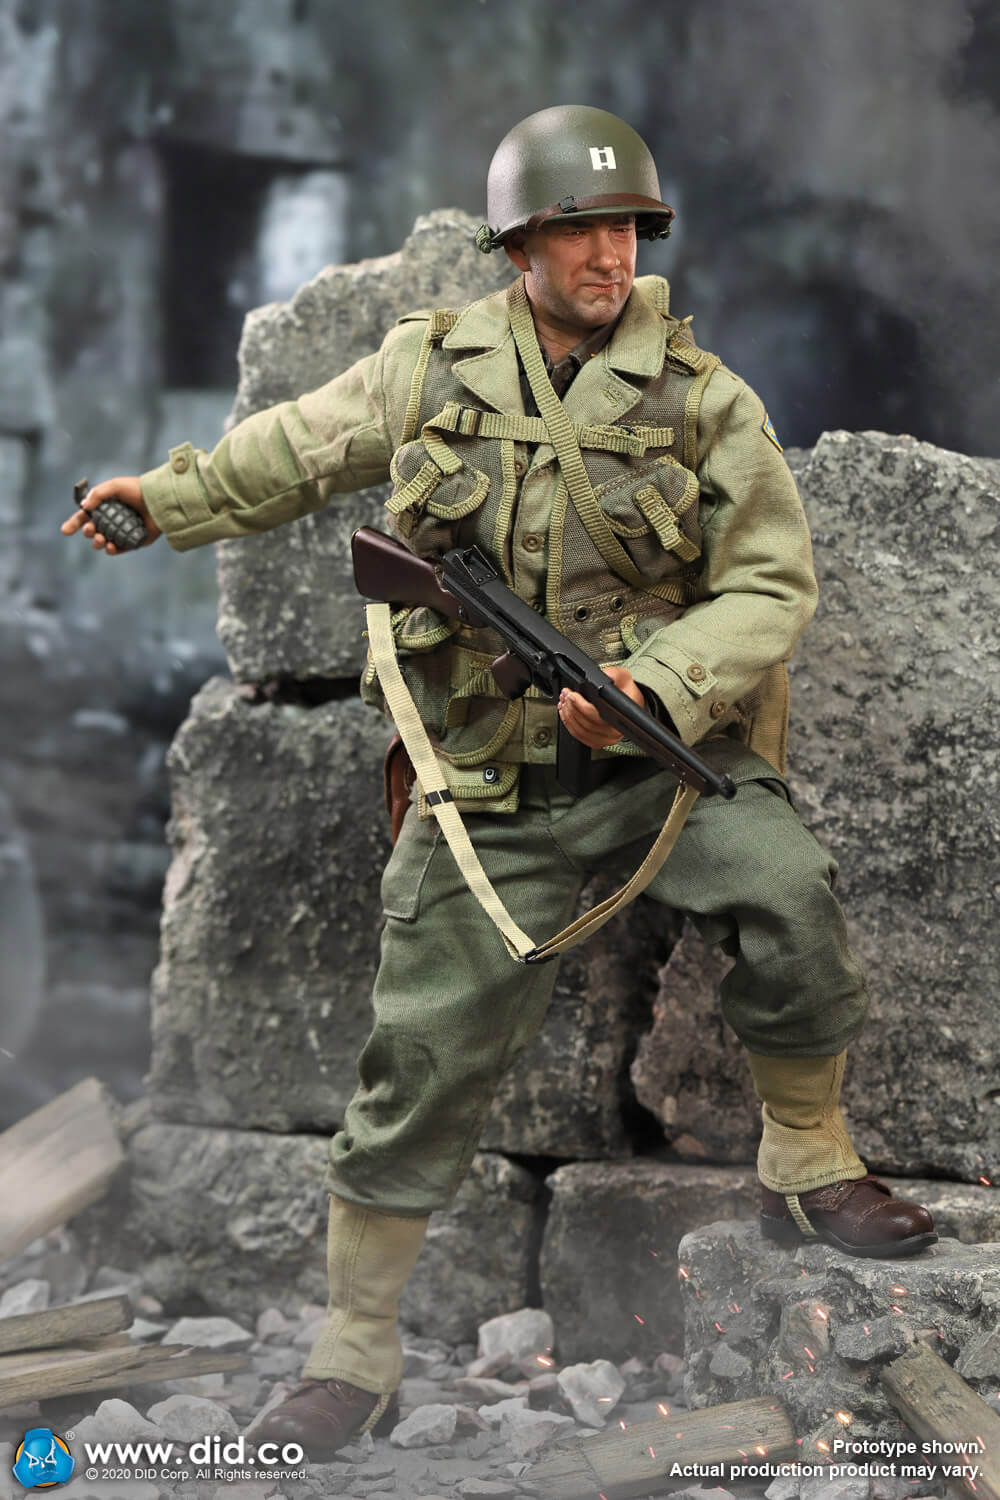 male - NEW PRODUCT: DiD: A80145 1/6 scale WWII US 2nd Ranger Battalion Series 3 Captain Miller 16199